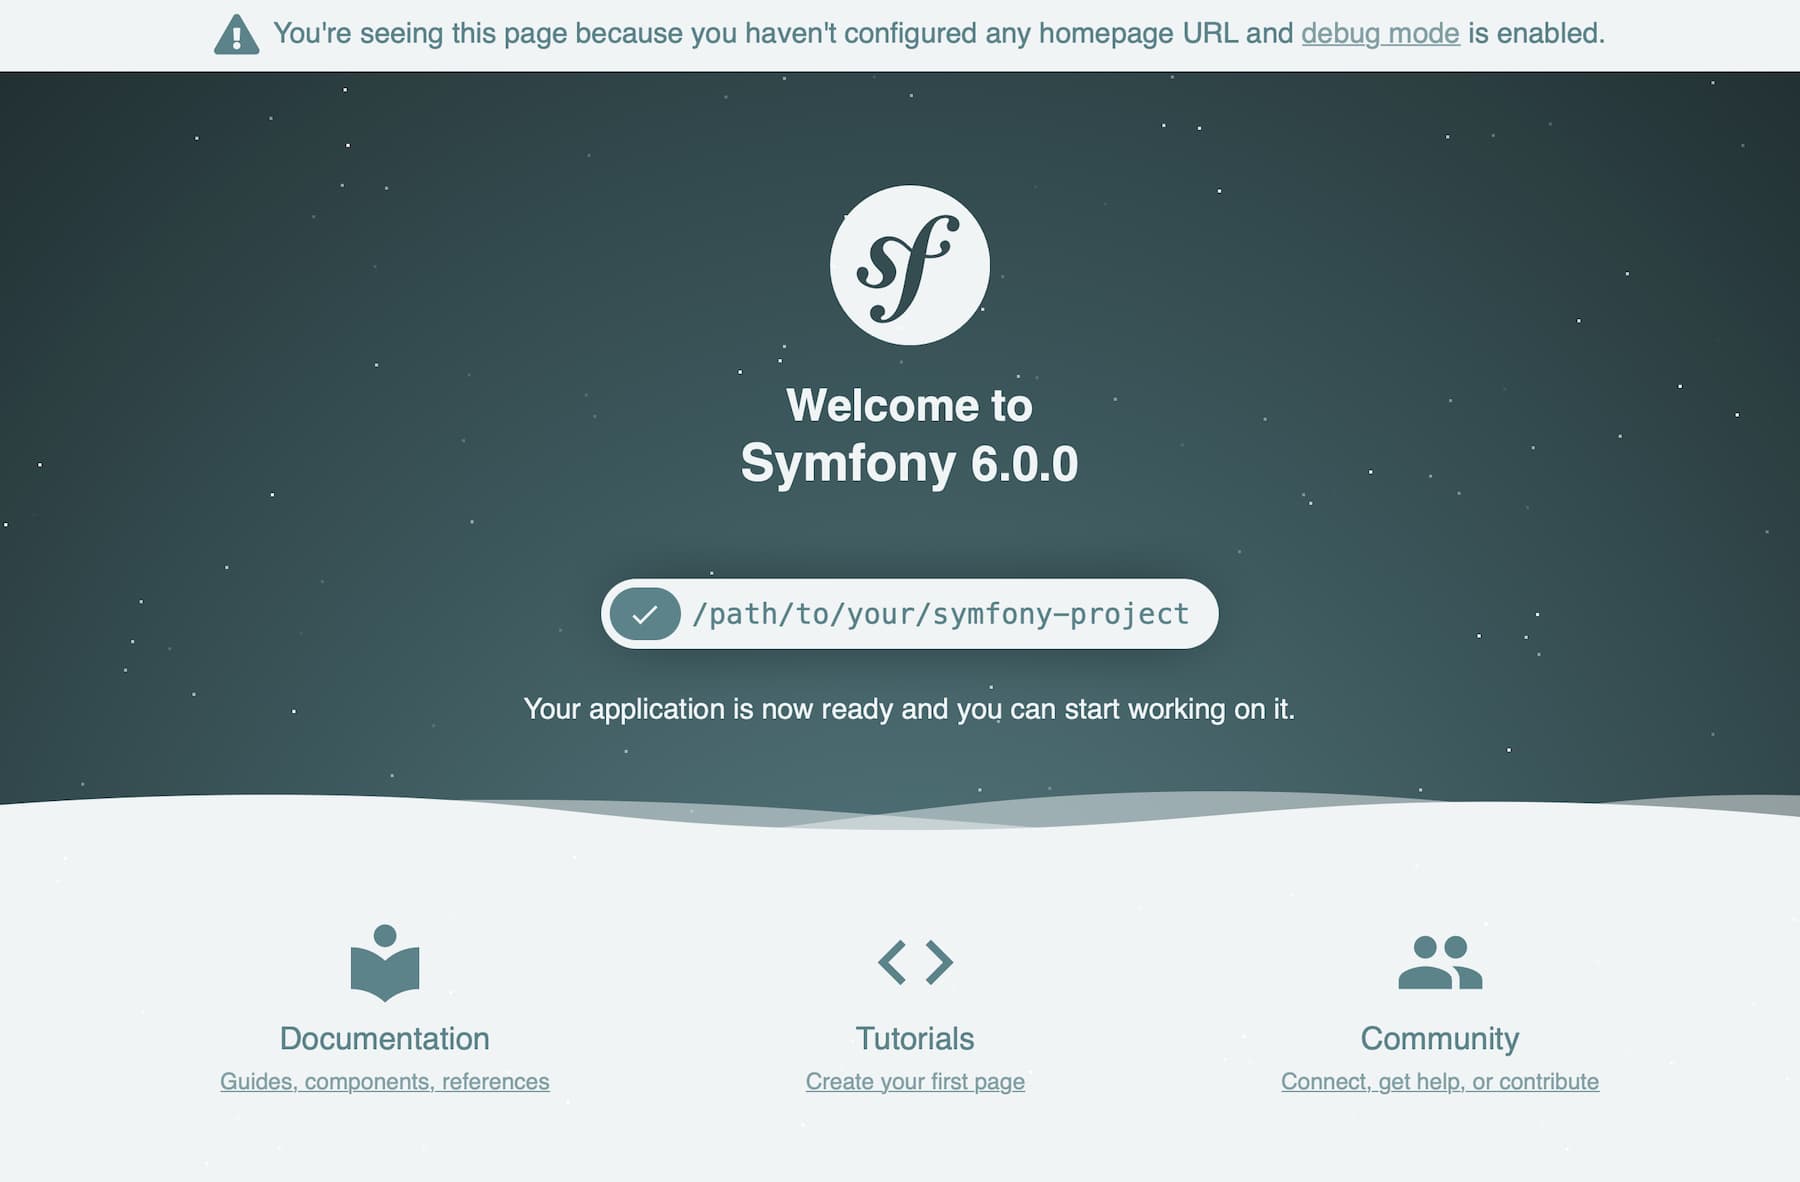 The default Symfony welcome page.